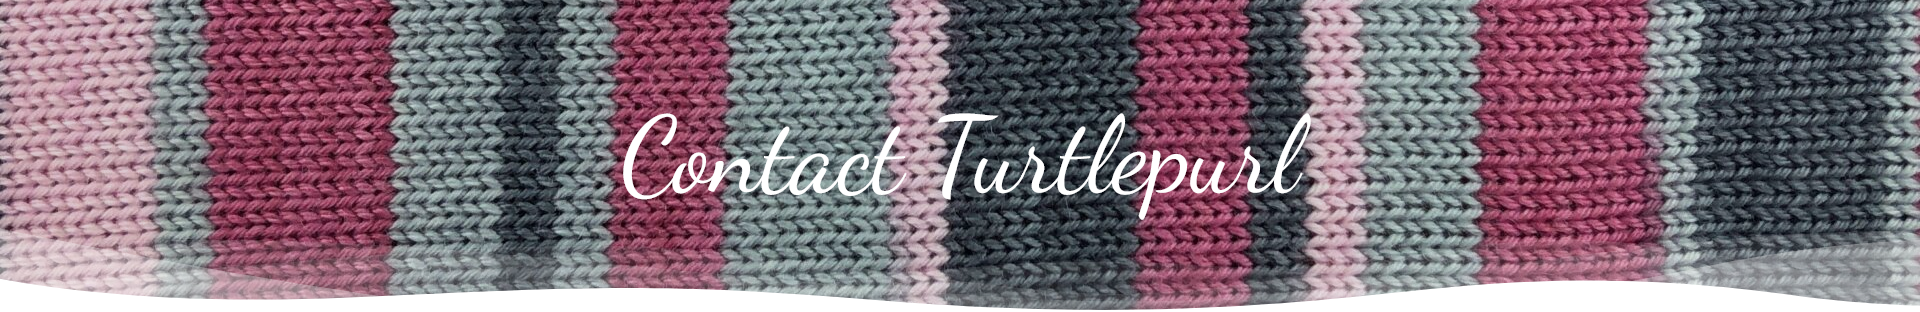 Contact turtlepurl banner